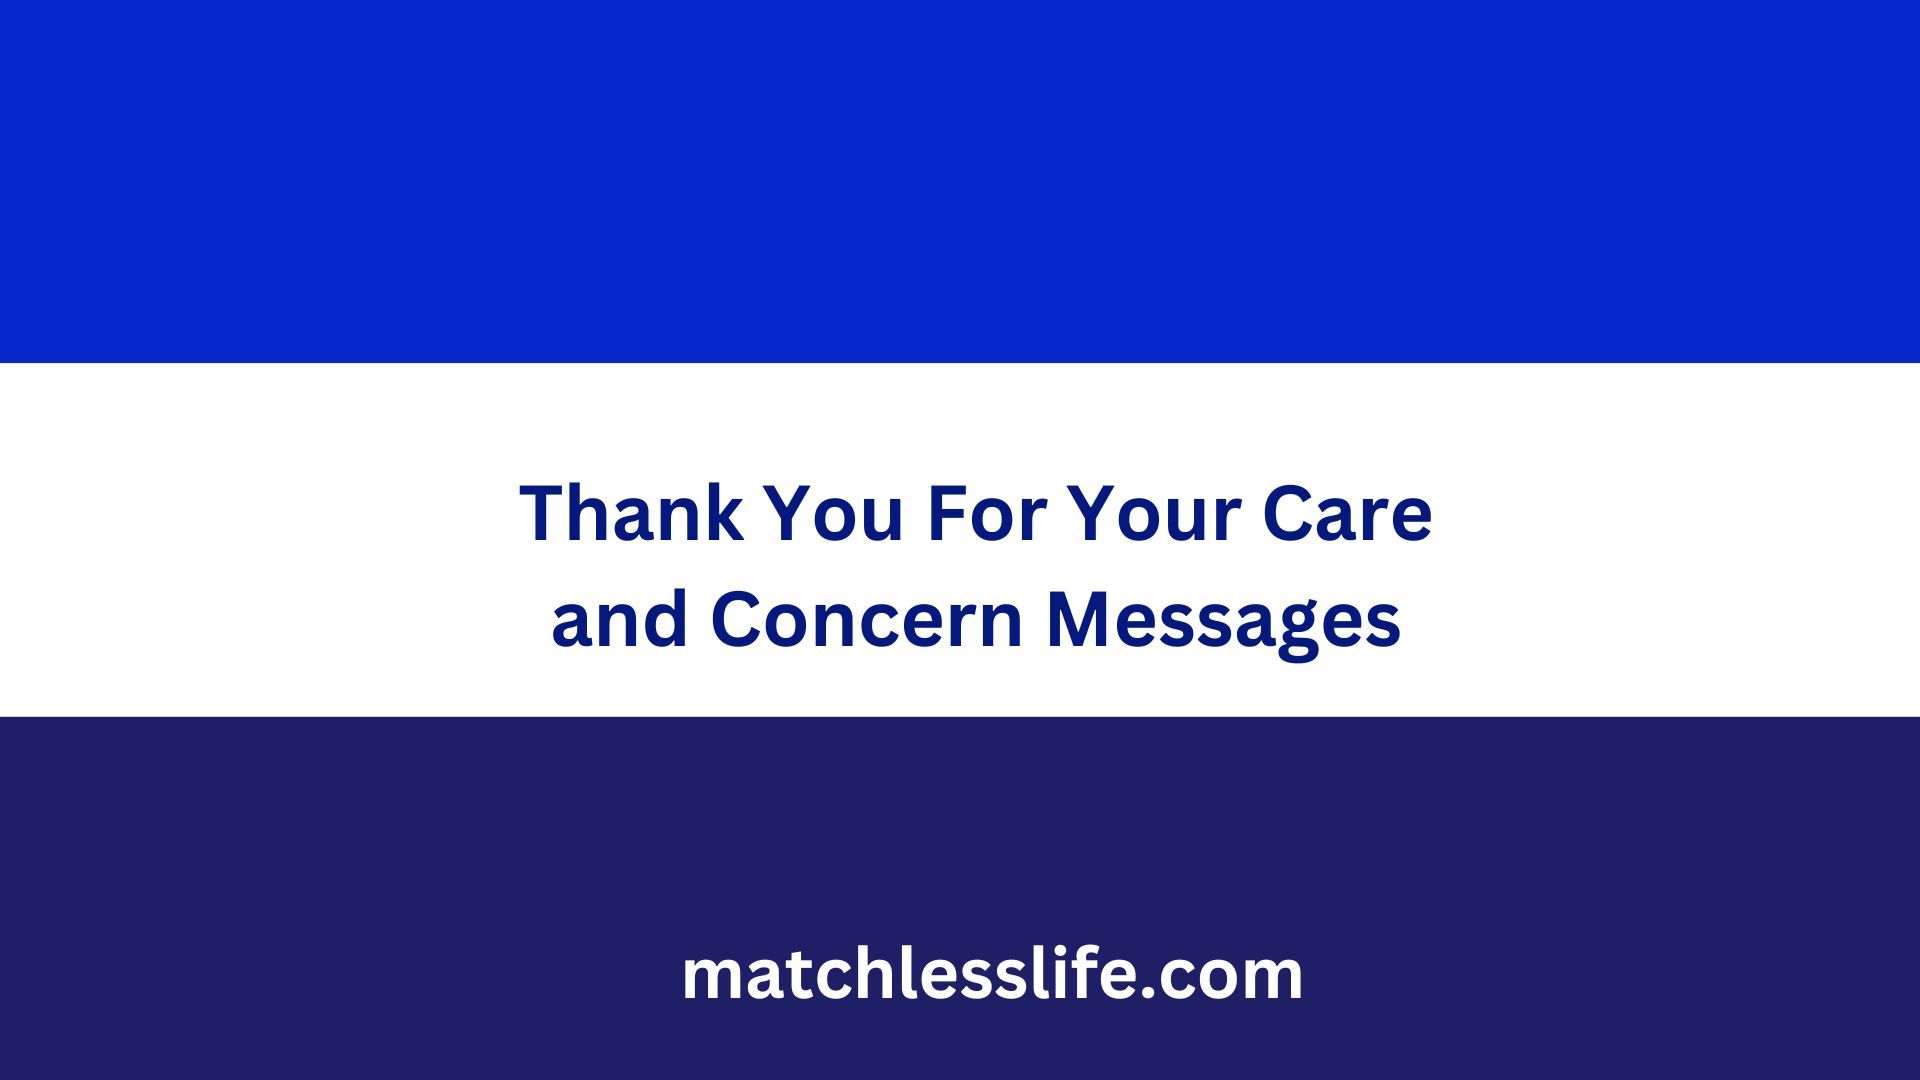 Thank You For Your Care and Concern Messages